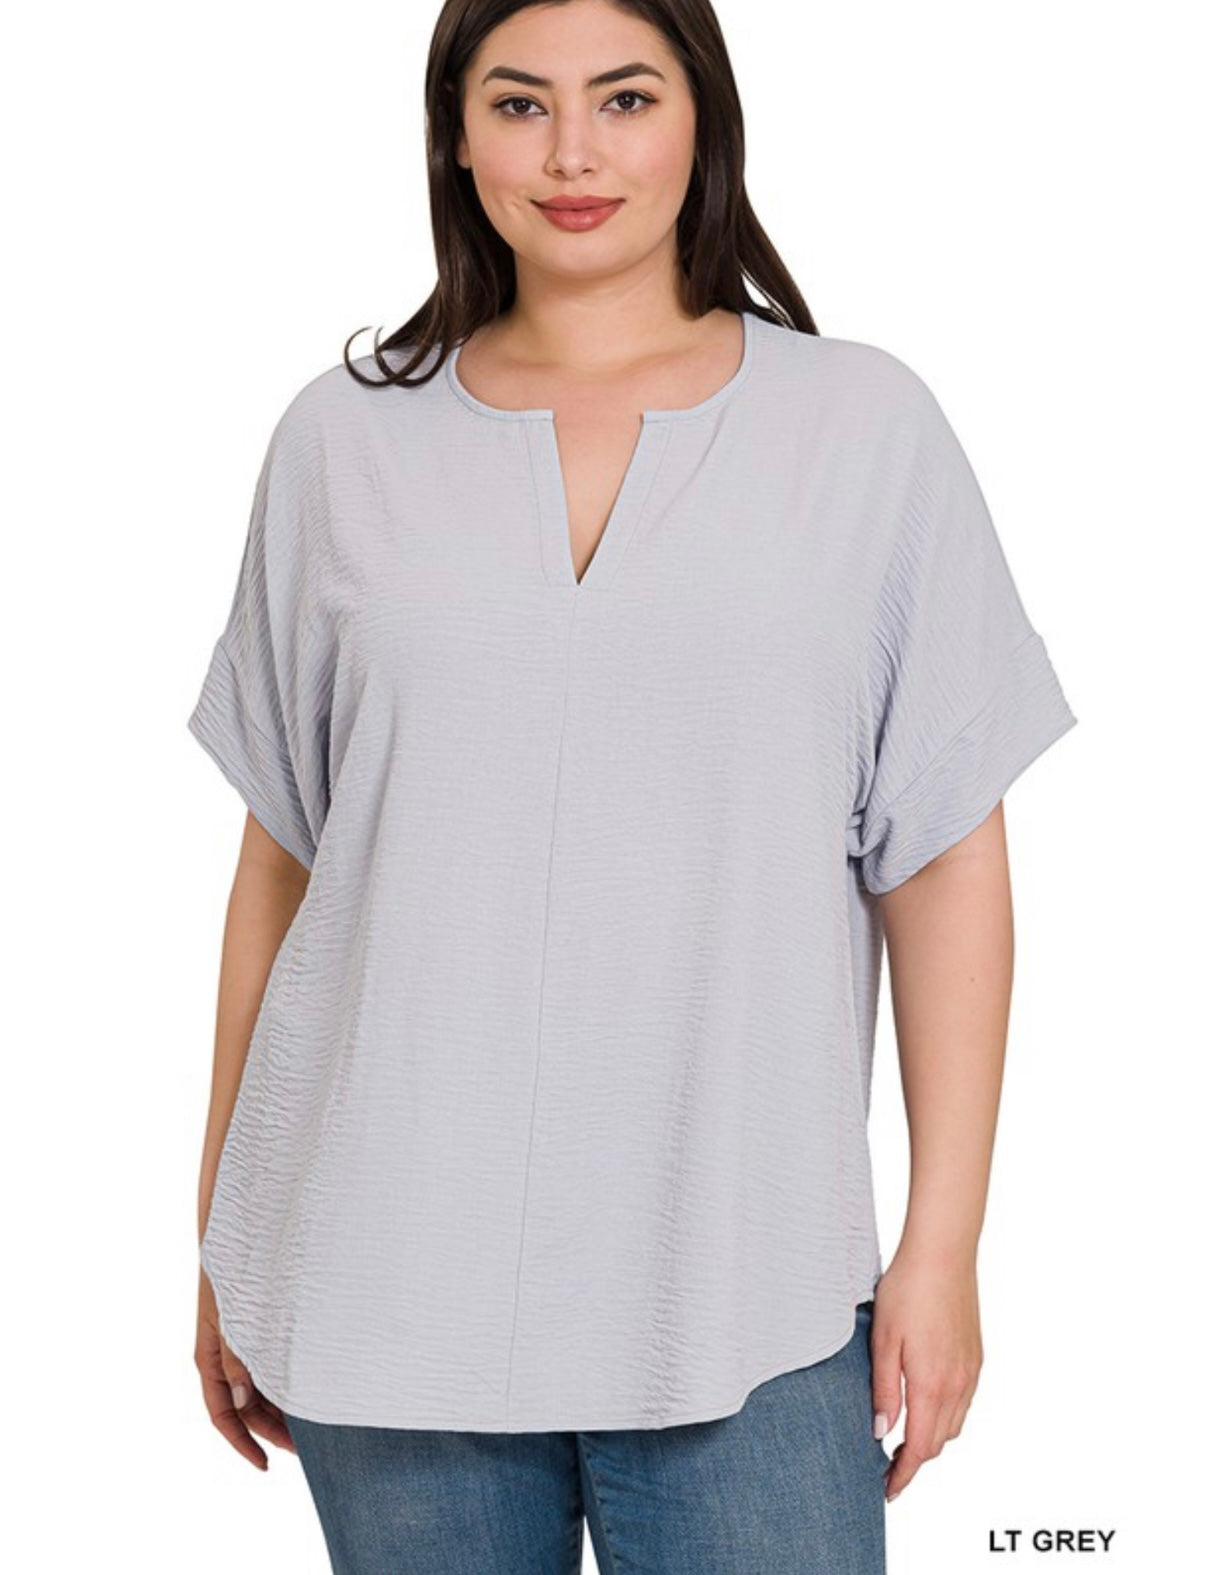 Woven Airflow Short Sleeve Top